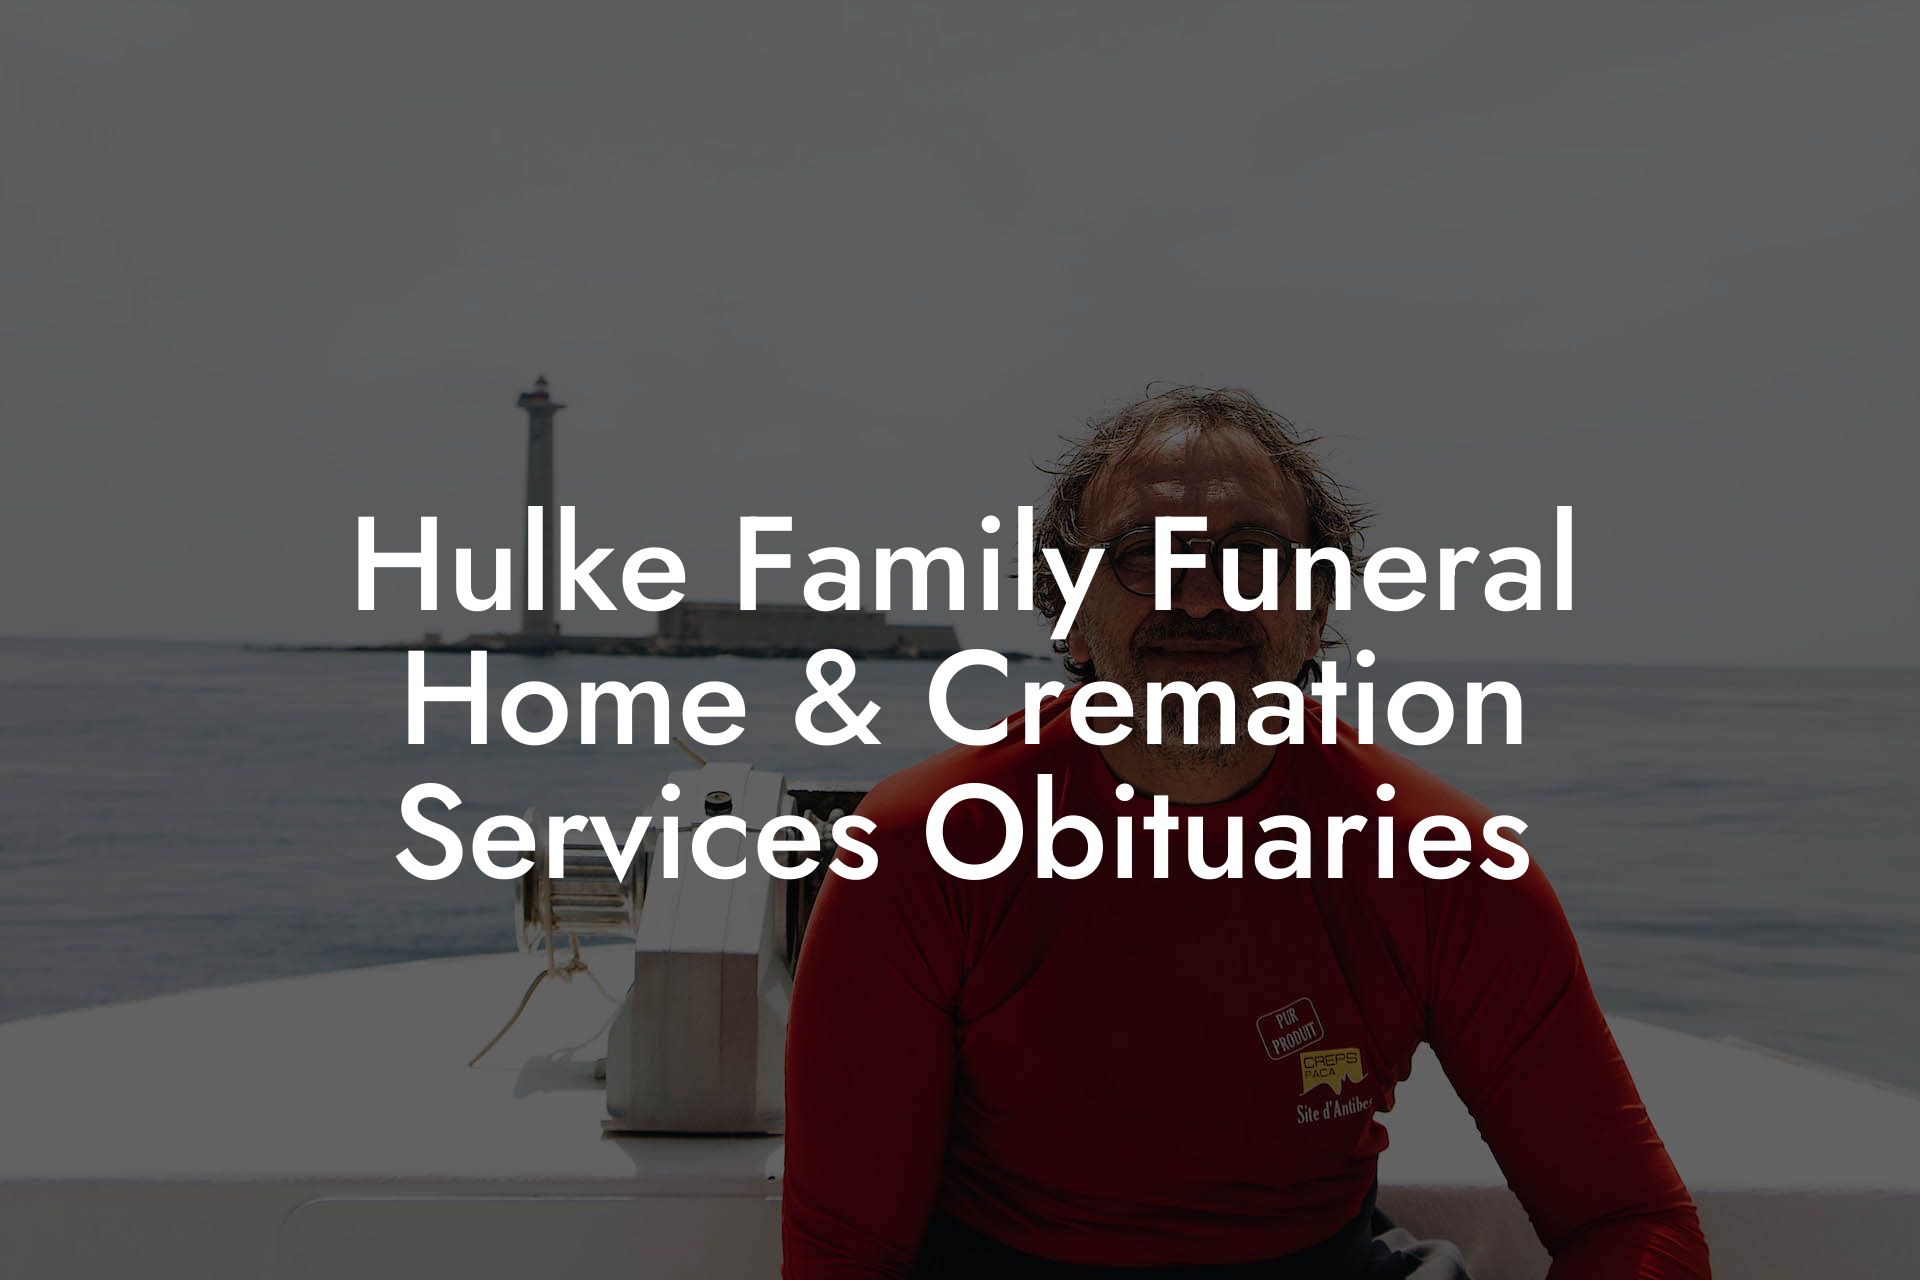 Hulke Family Funeral Home & Cremation Services Obituaries